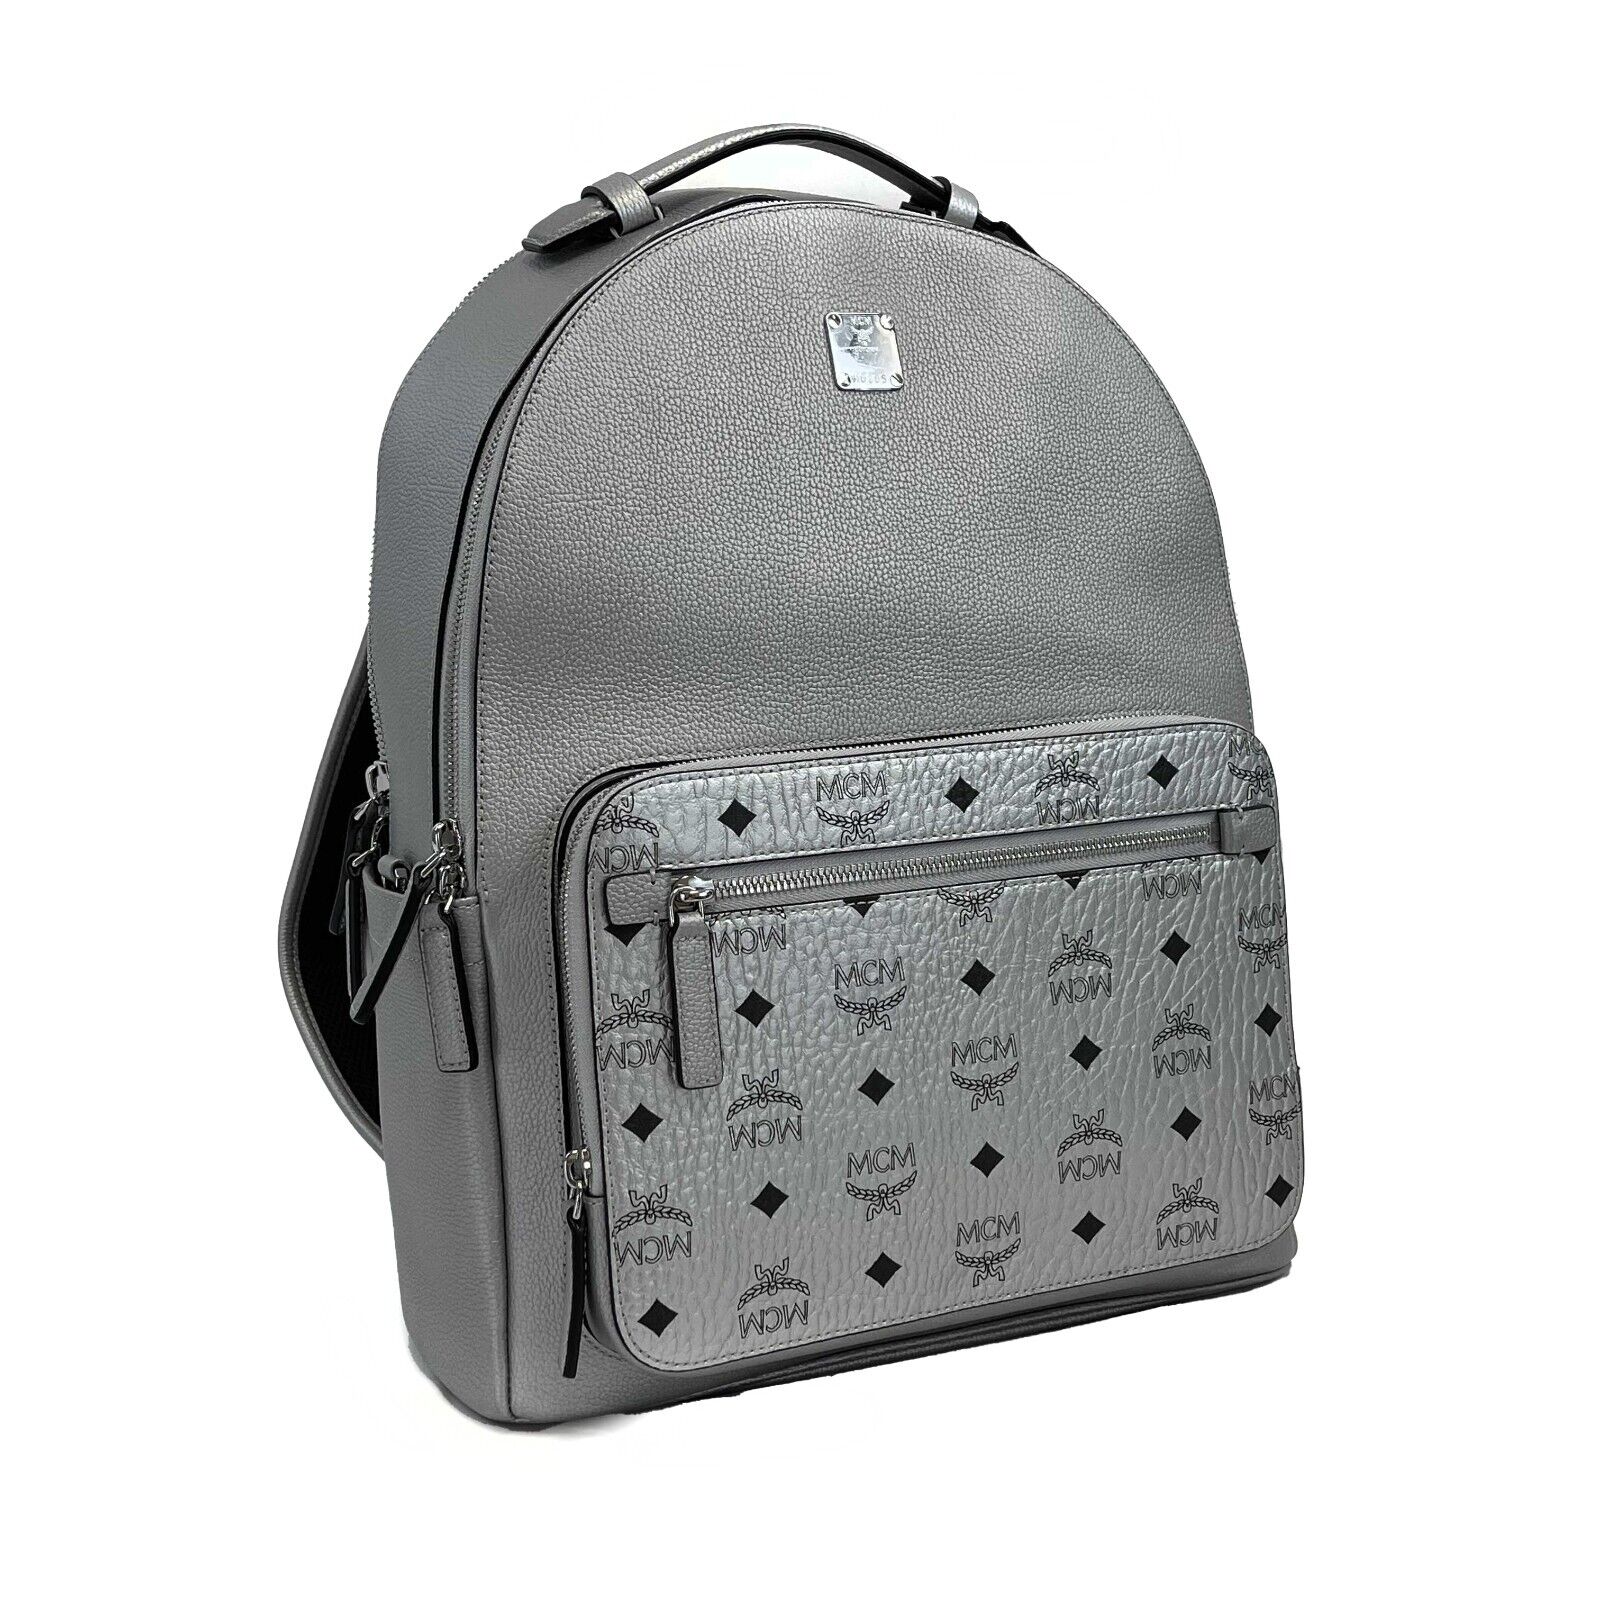 MCM - NWT Silver Large Stark Backpack - Silver & Black NEW